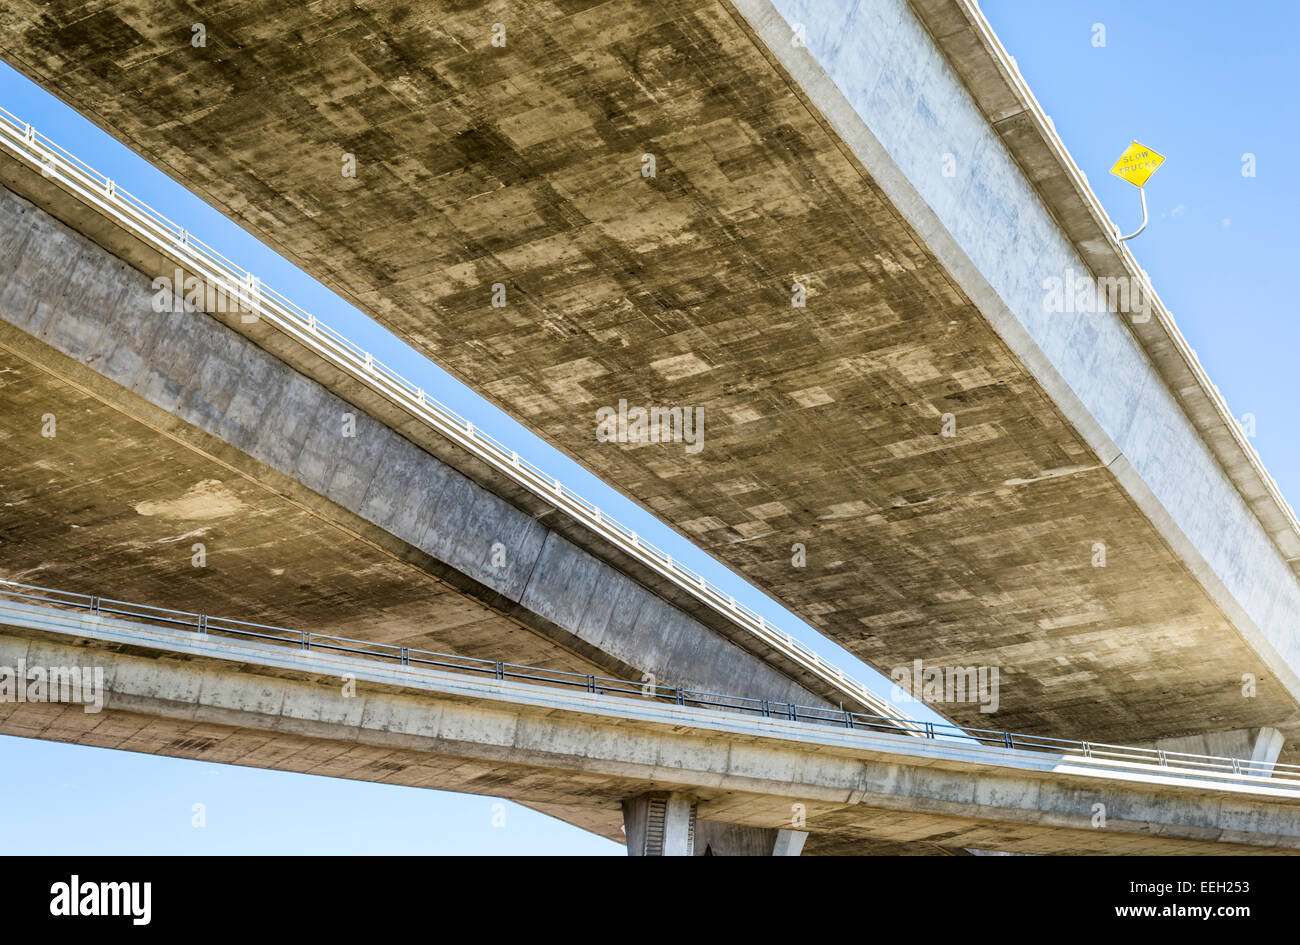 San Diego freeways and concrete structures. Abstract image. San Diego, California,  United States. Stock Photo